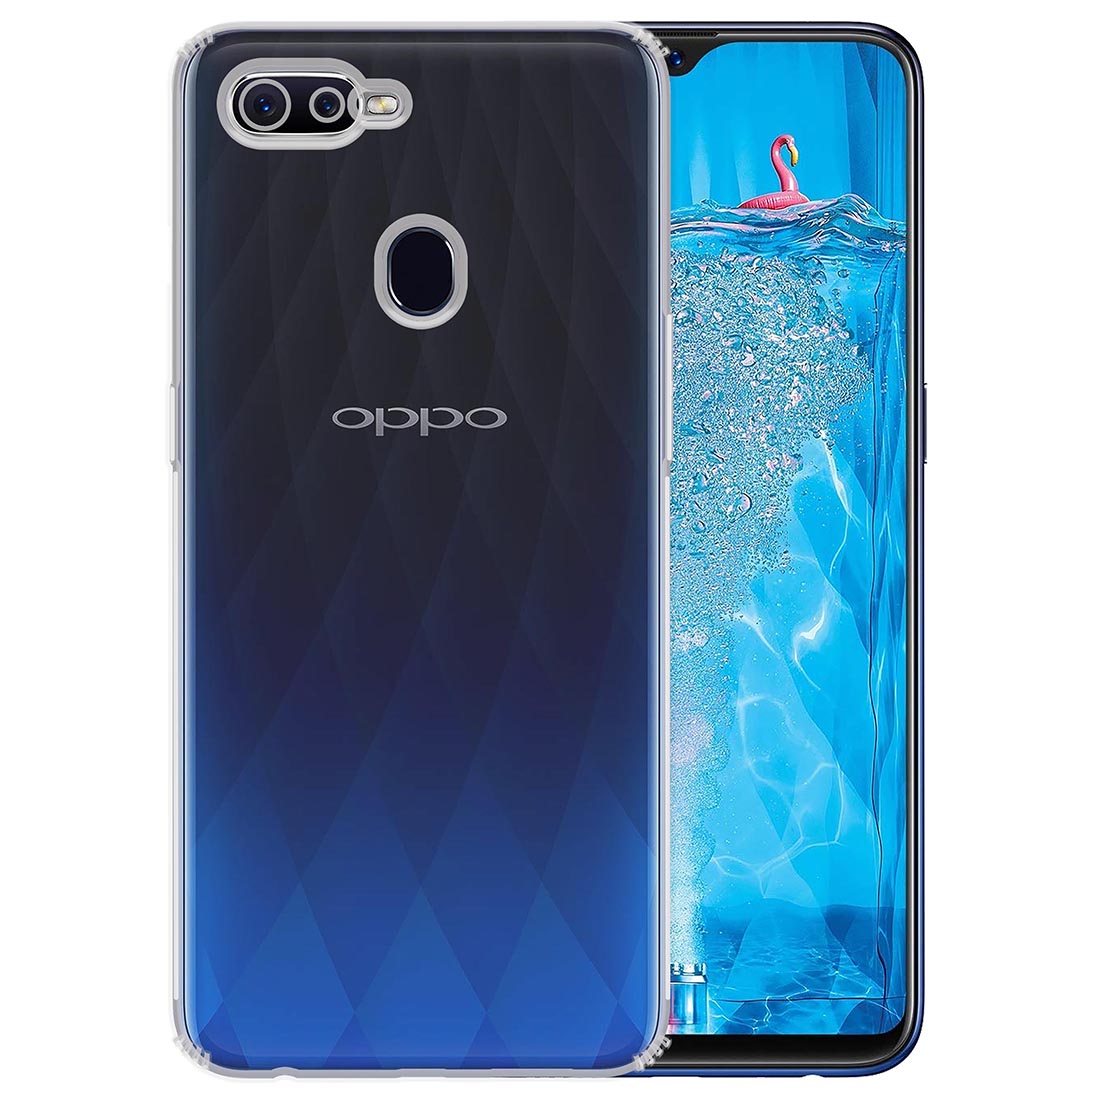 Anti Dust Plug Back Case Cover for Oppo F9